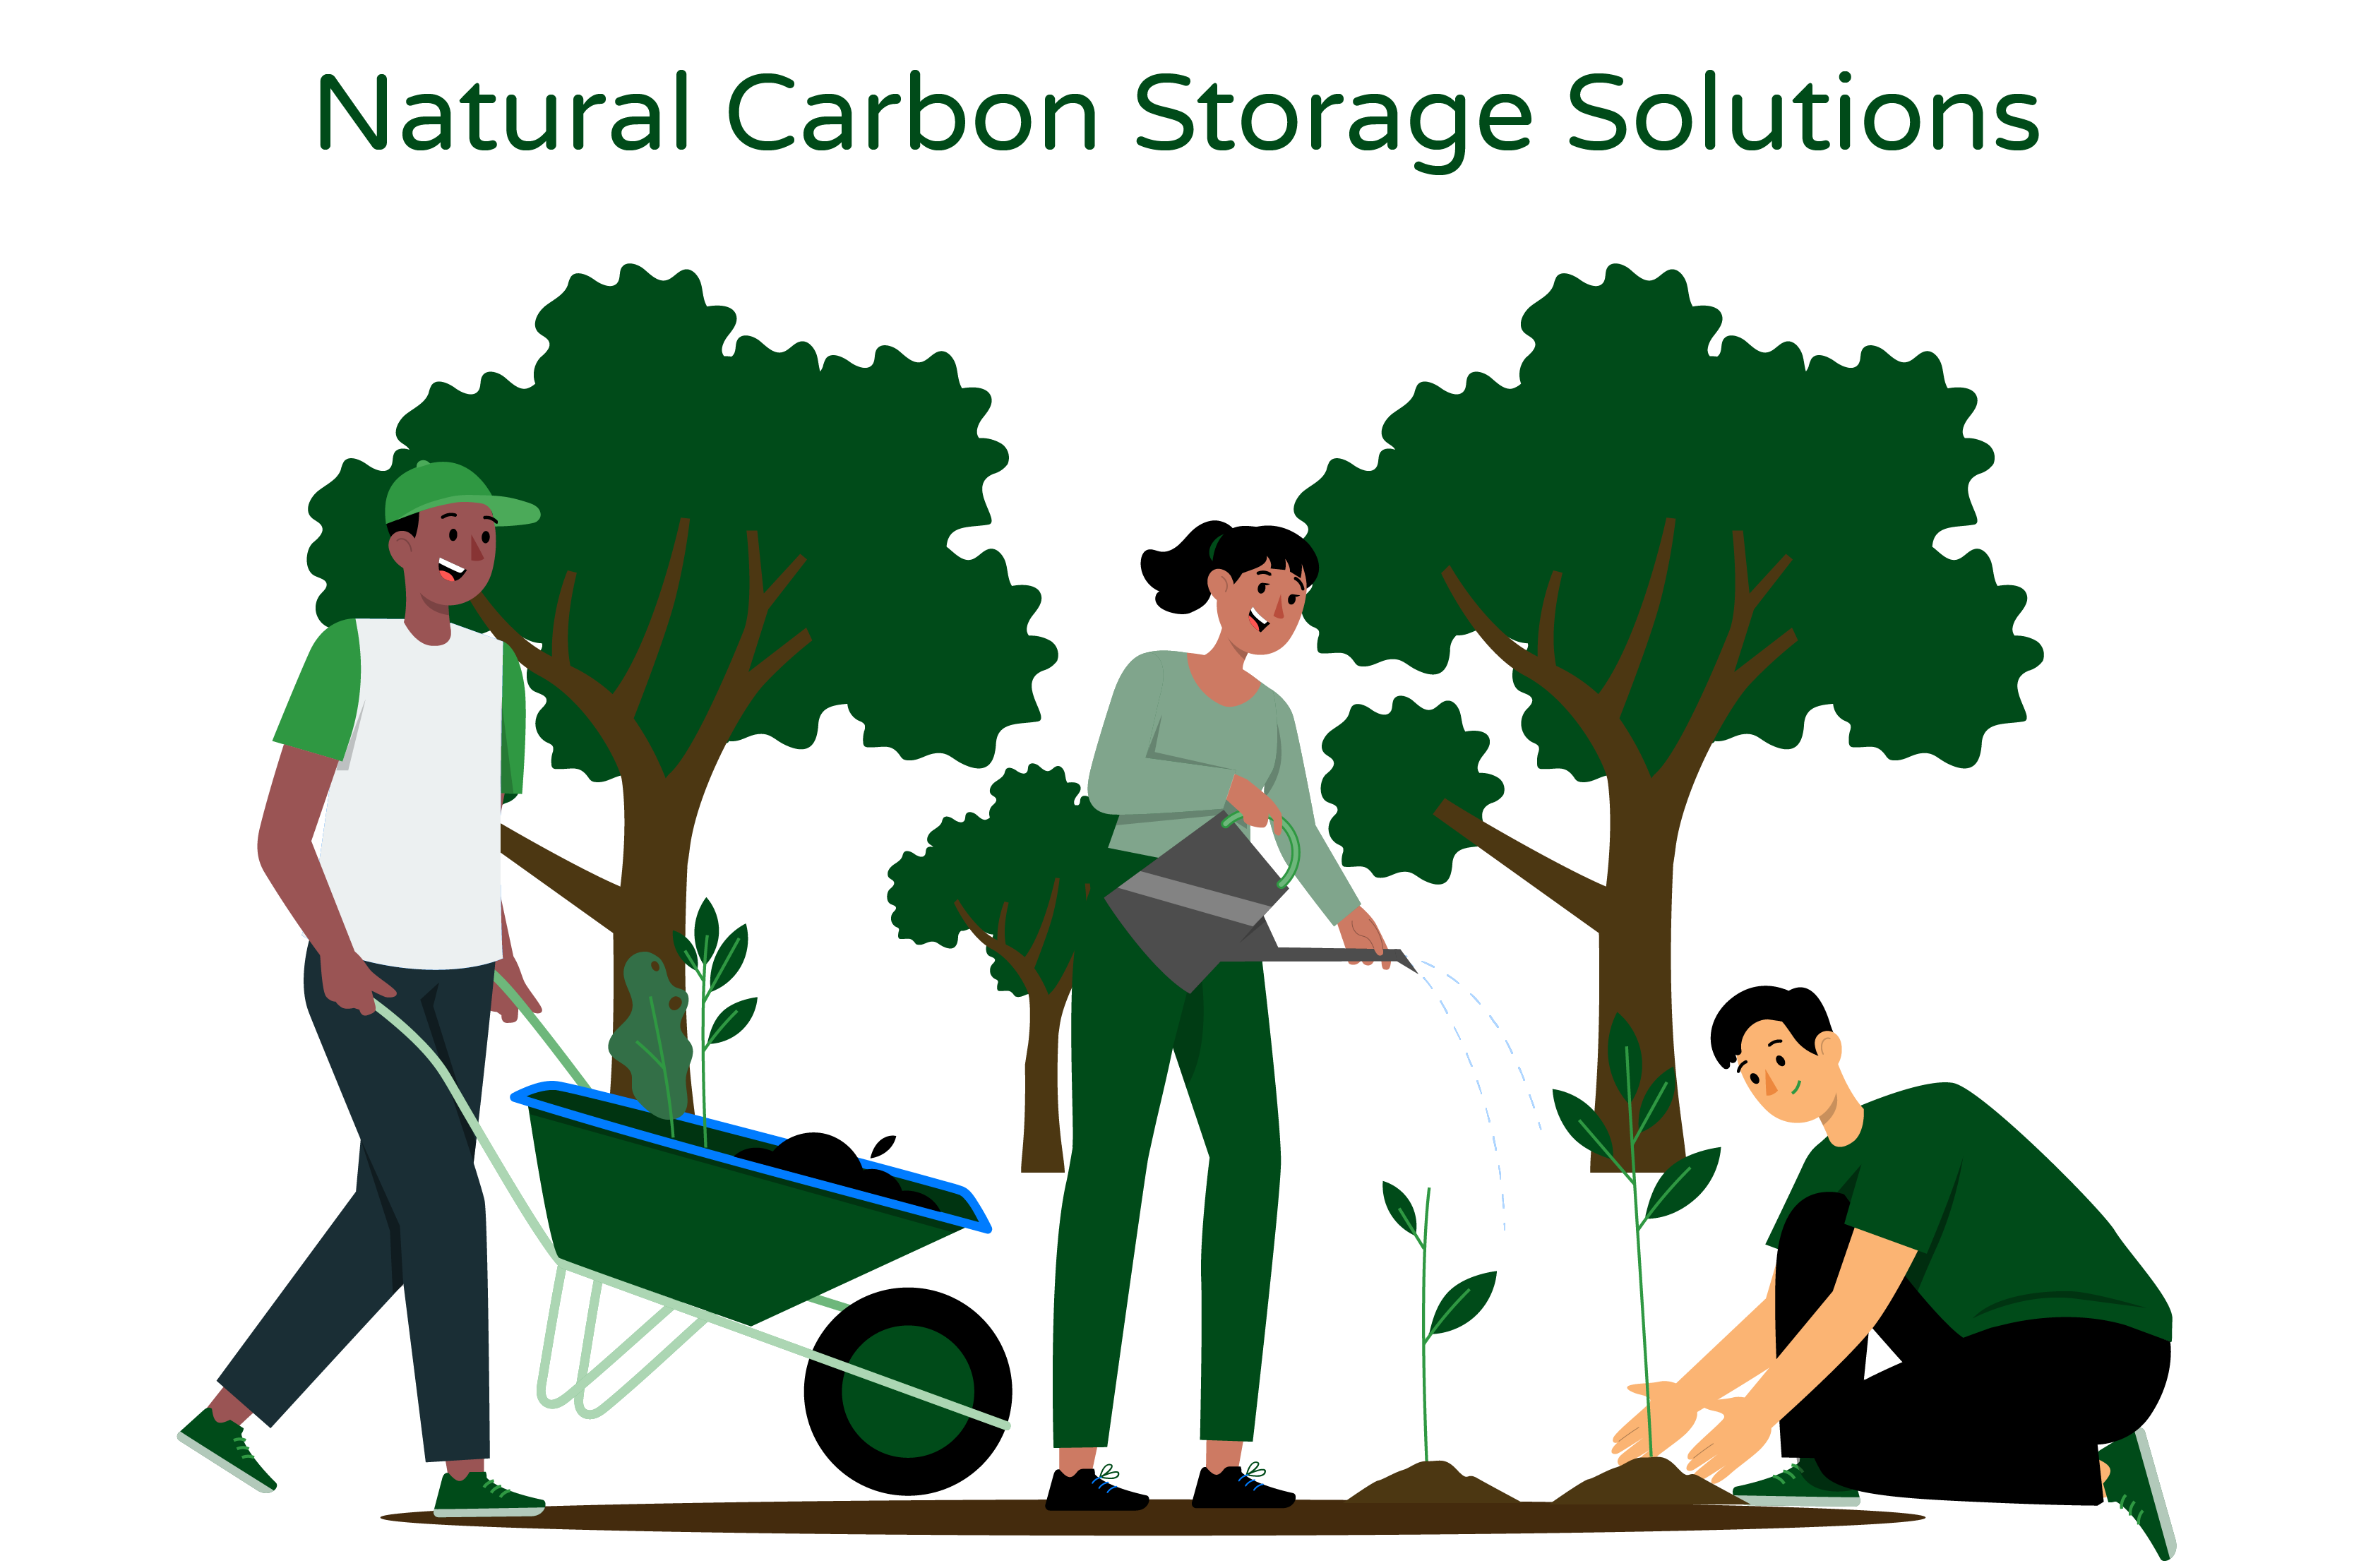 Illustration titled 'Natural Carbon Storage Solutions.' The image portrays three individuals actively engaged in growing plants and forests as part of a strategy to naturally trap carbon. They are depicted planning and implementing methods to enhance carbon storage in the environment."  The illustration visually represents the concept presented in the title. It showcases the efforts of individuals to utilize natural carbon storage solutions. The three people symbolize the collective action taken by communities, organizations, or individuals to contribute to carbon sequestration through plant and forest growth.  By growing plants and forests, they are actively participating in the natural process of carbon capture, where plants absorb carbon dioxide (CO2) during photosynthesis and store it within their biomass and in the soil. This depiction highlights the significance of nature-based approaches in mitigating climate change and reducing CO2 levels in the atmosphere.  Overall, the 'Natural Carbon Storage Solutions' illustration conveys the importance of harnessing natural processes, such as plant and forest growth, as effective strategies for trapping carbon and addressing climate change.